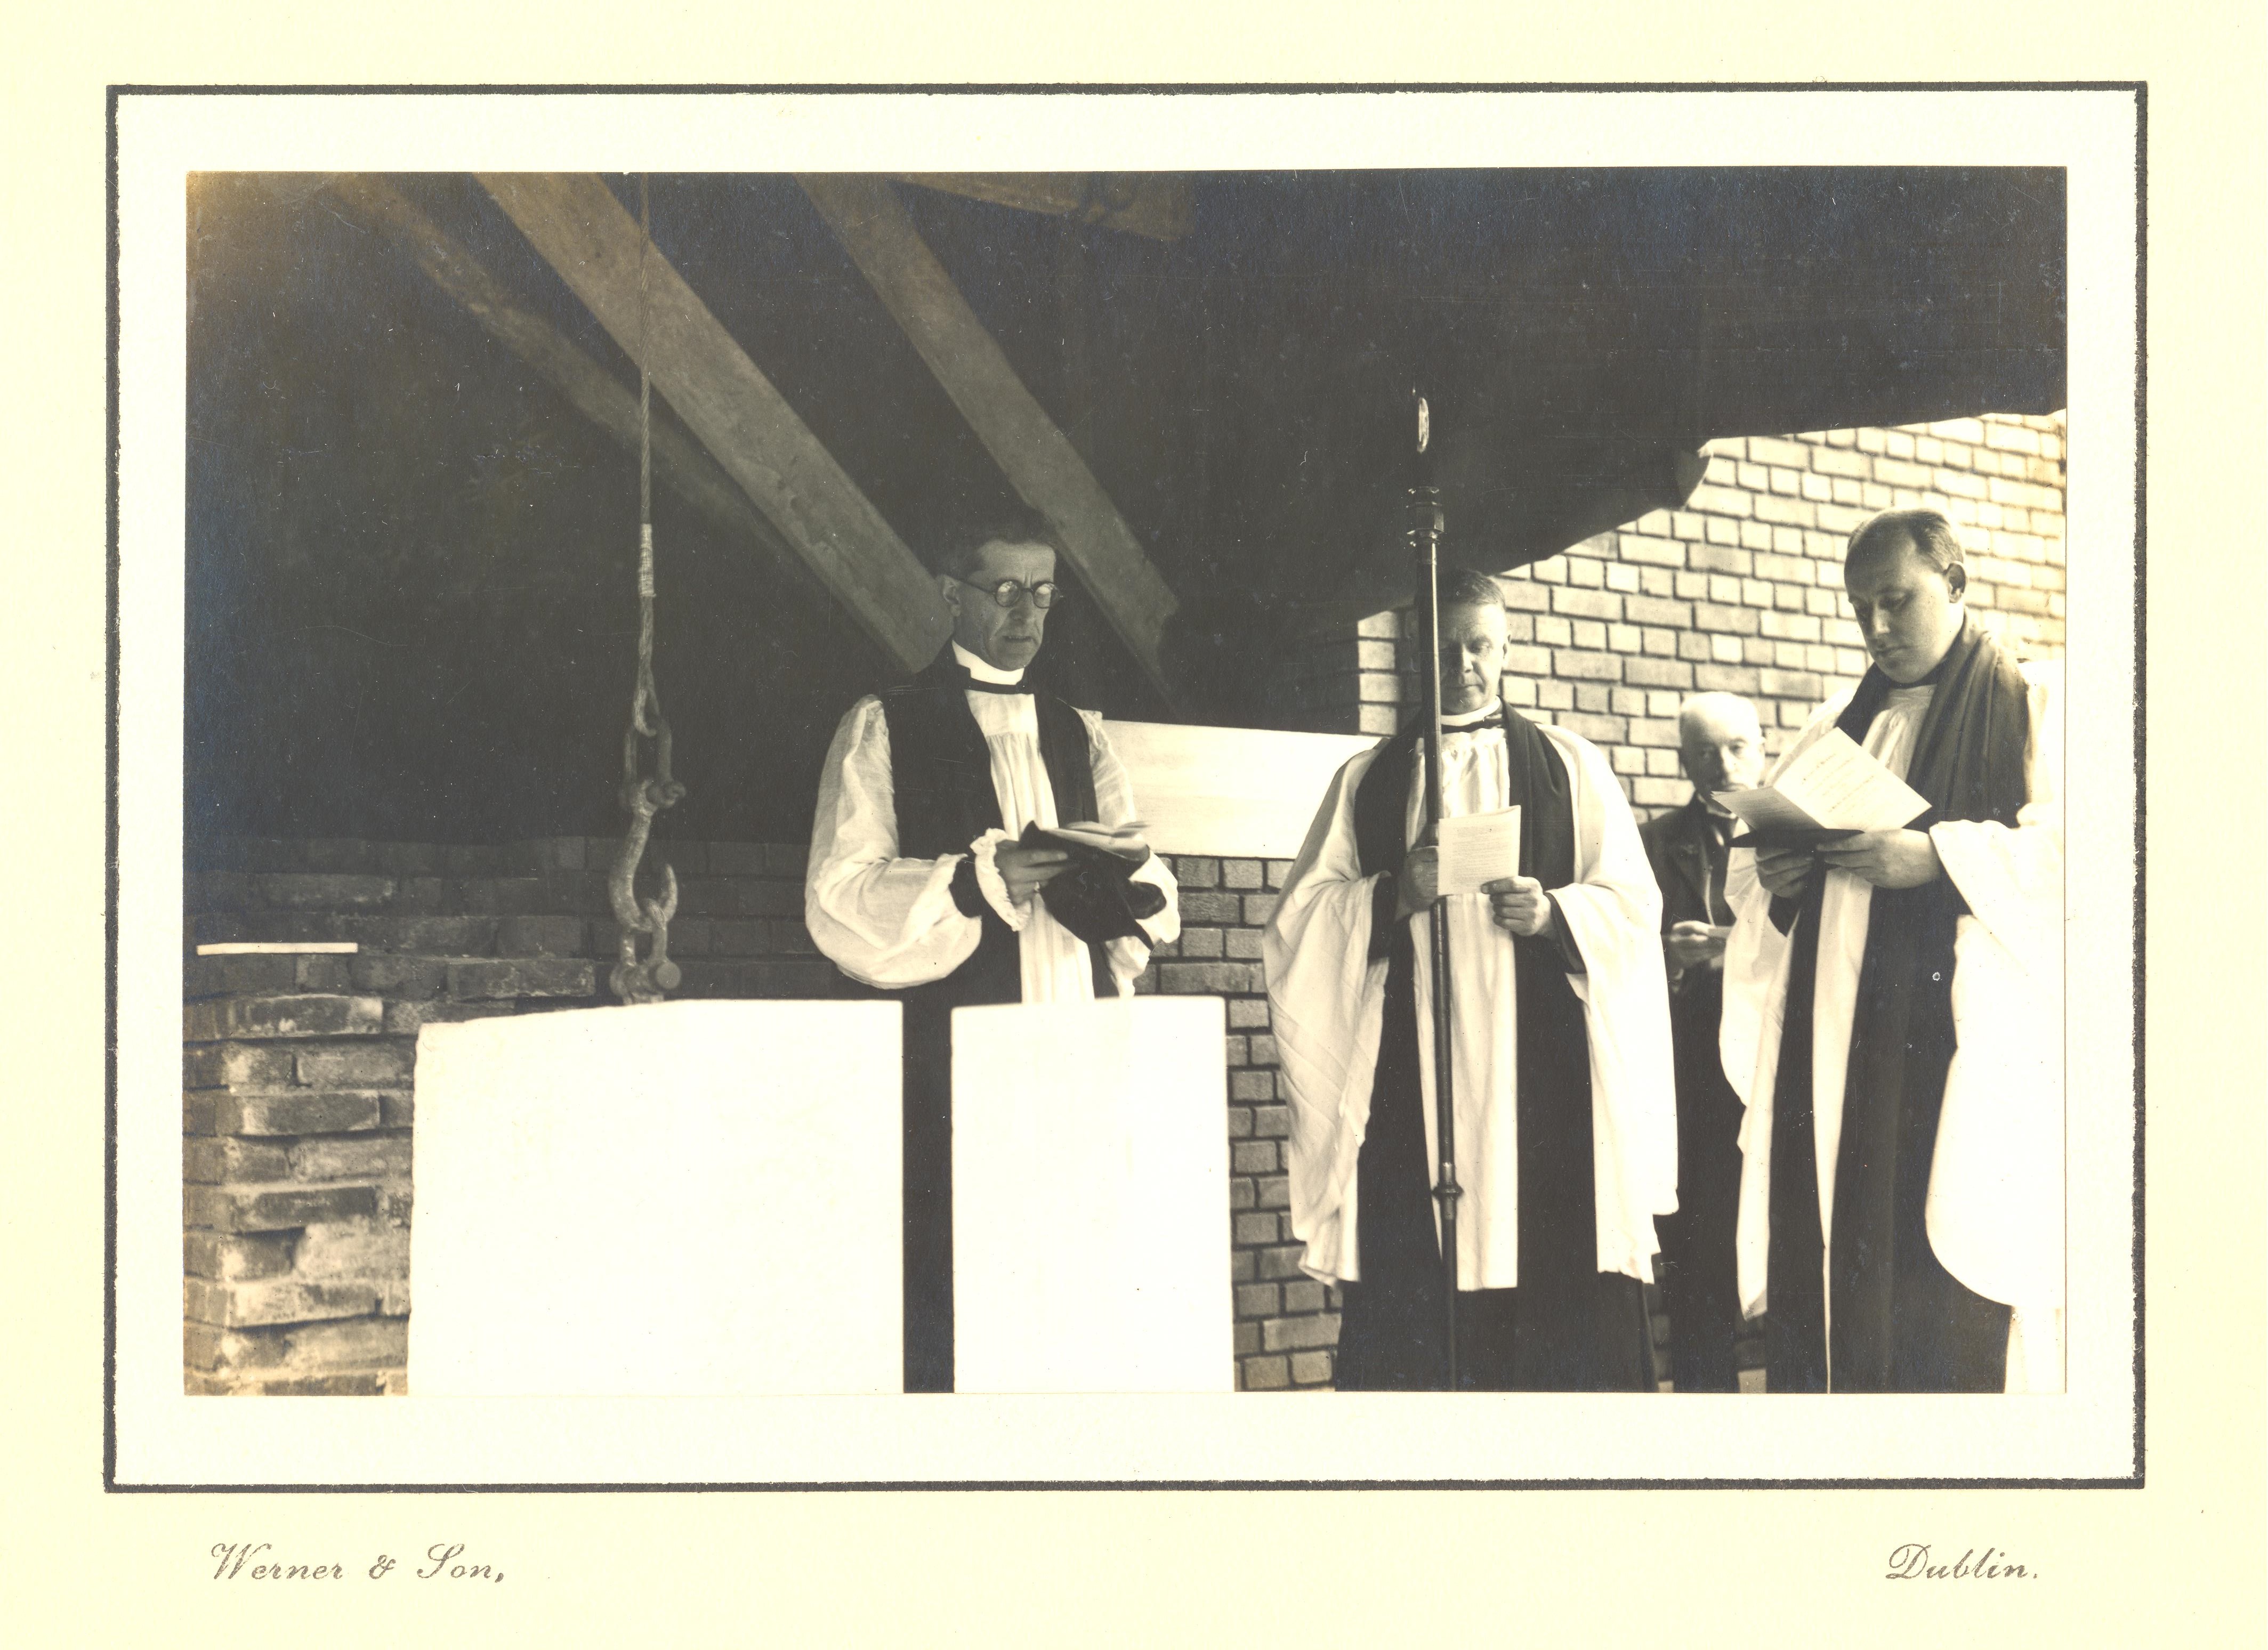 The Most Revd Dr Gregg with the incumbent, Revd John Purser Shortt pictured to the far-right P.80.29.2